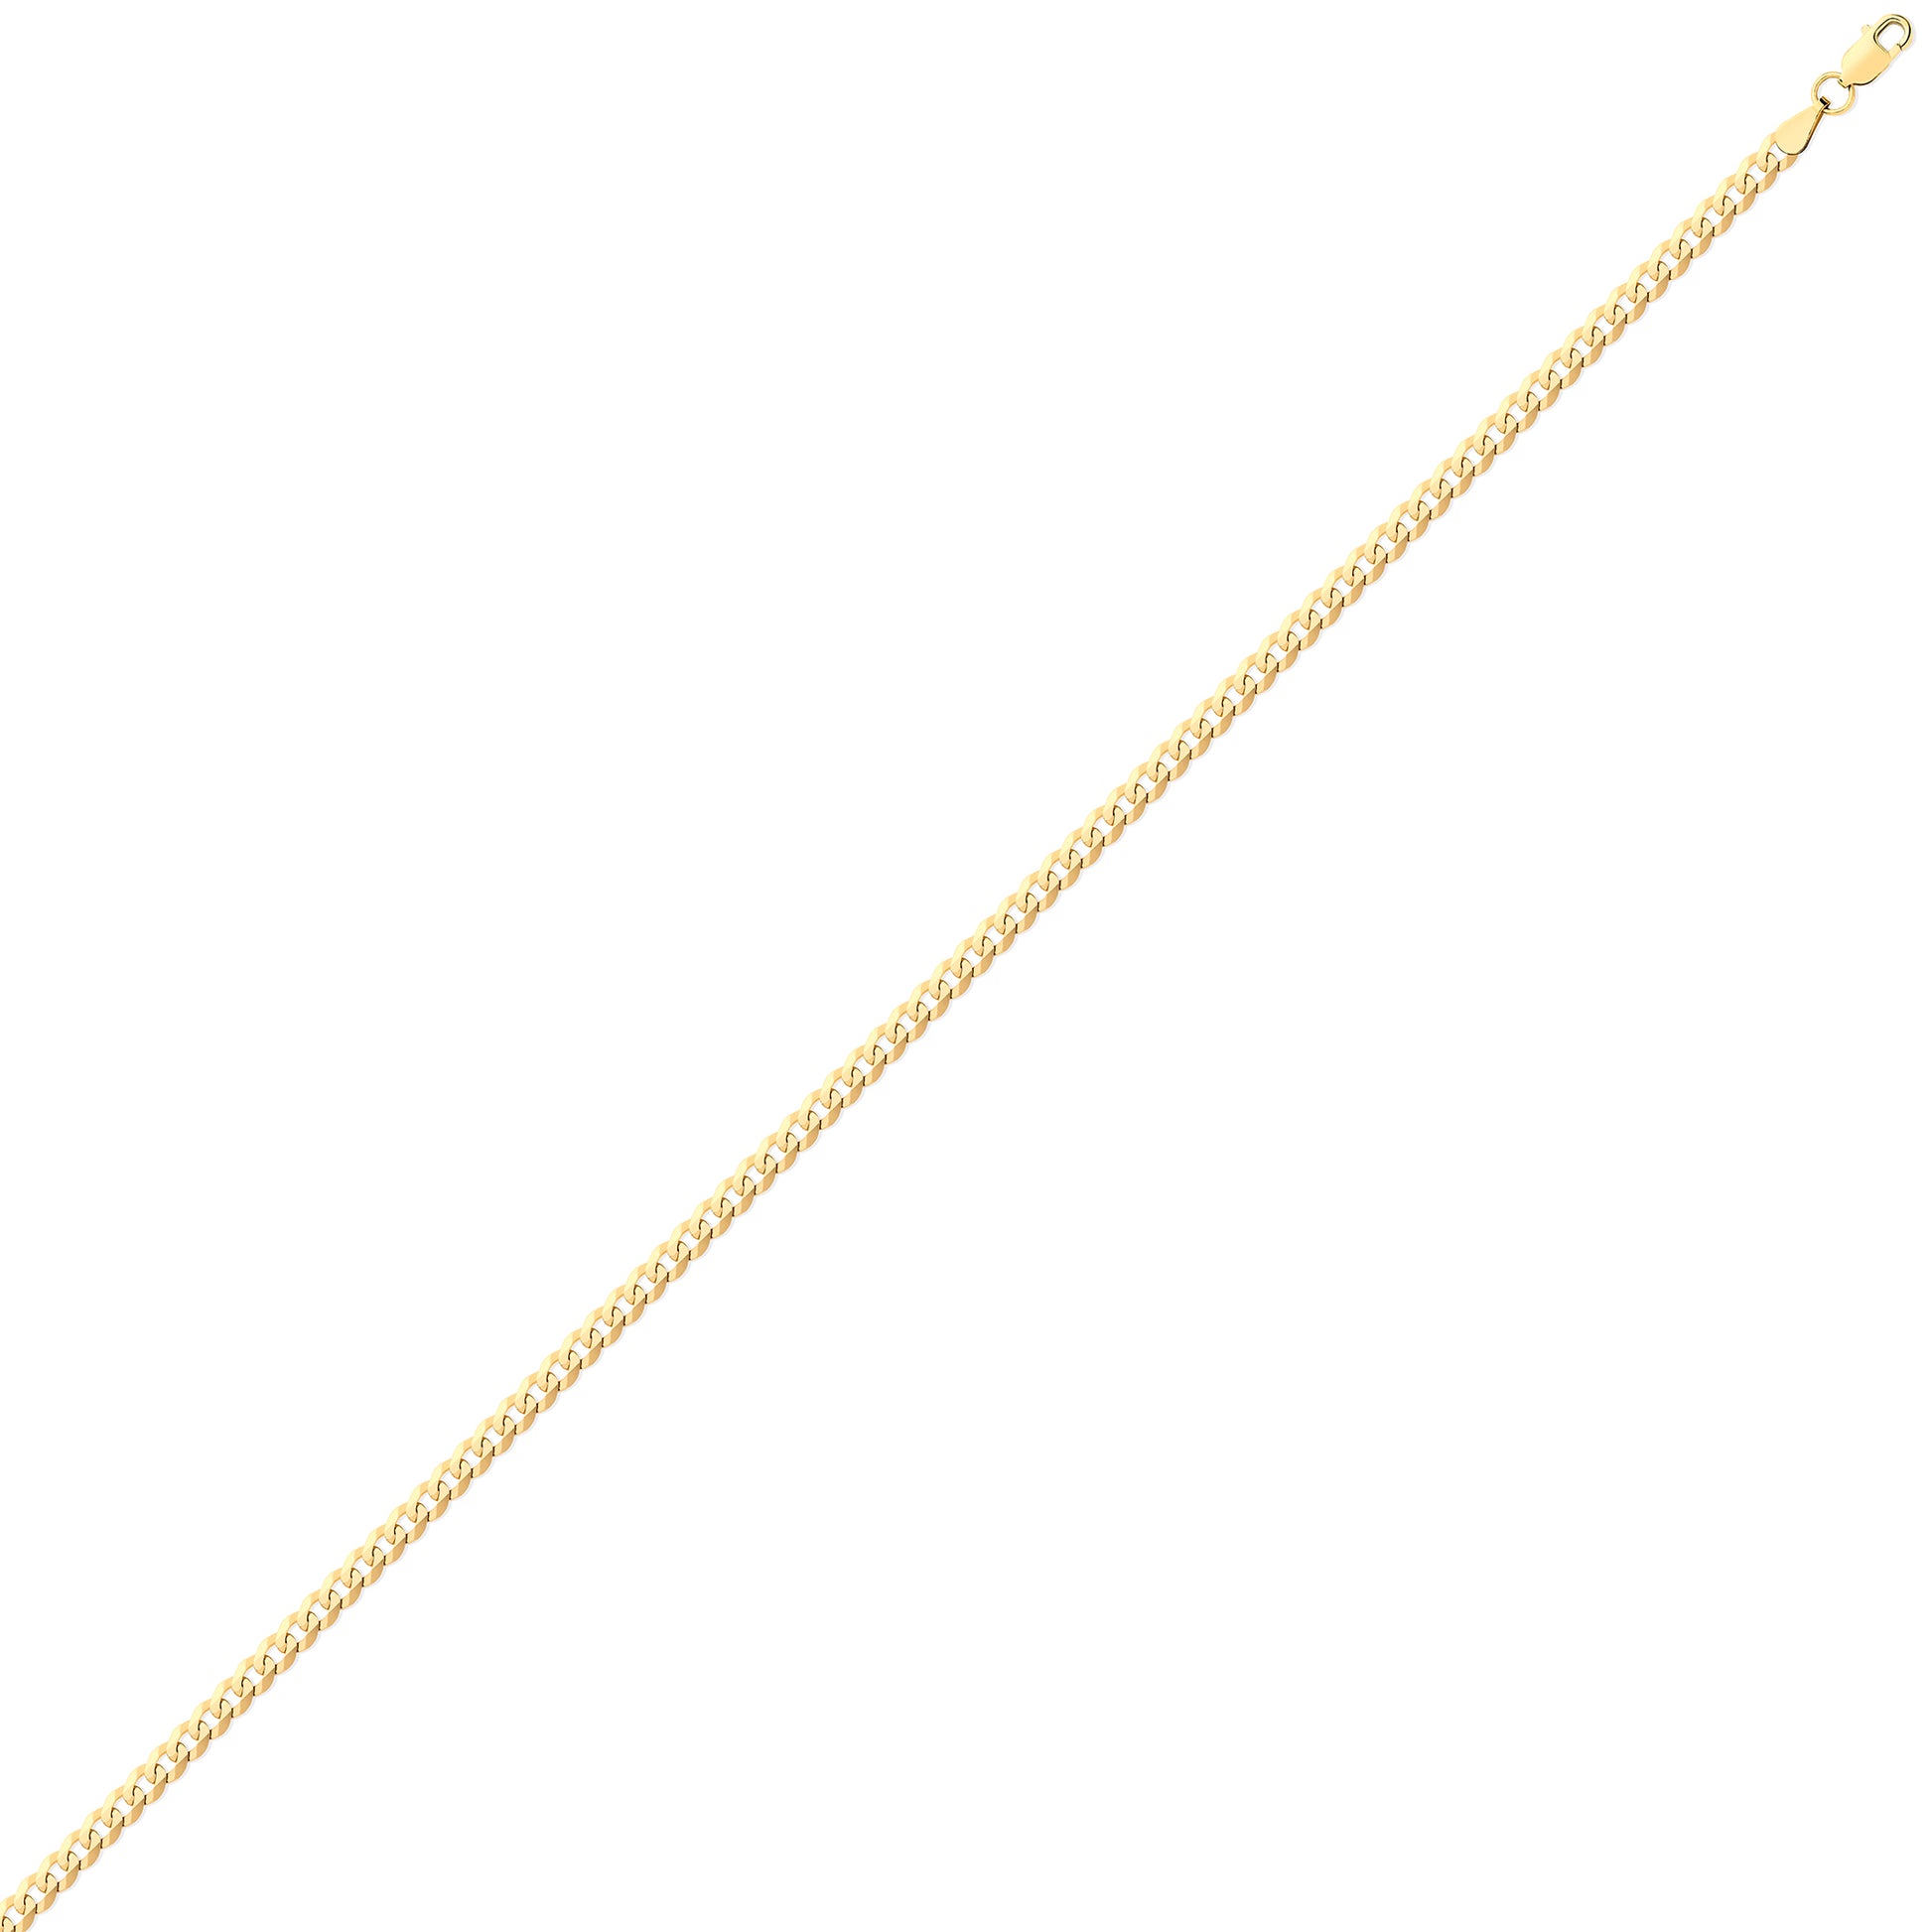 Unisex 9ct Gold  Bevelled Flat Curb Chain Necklace 3mm - G9CH001